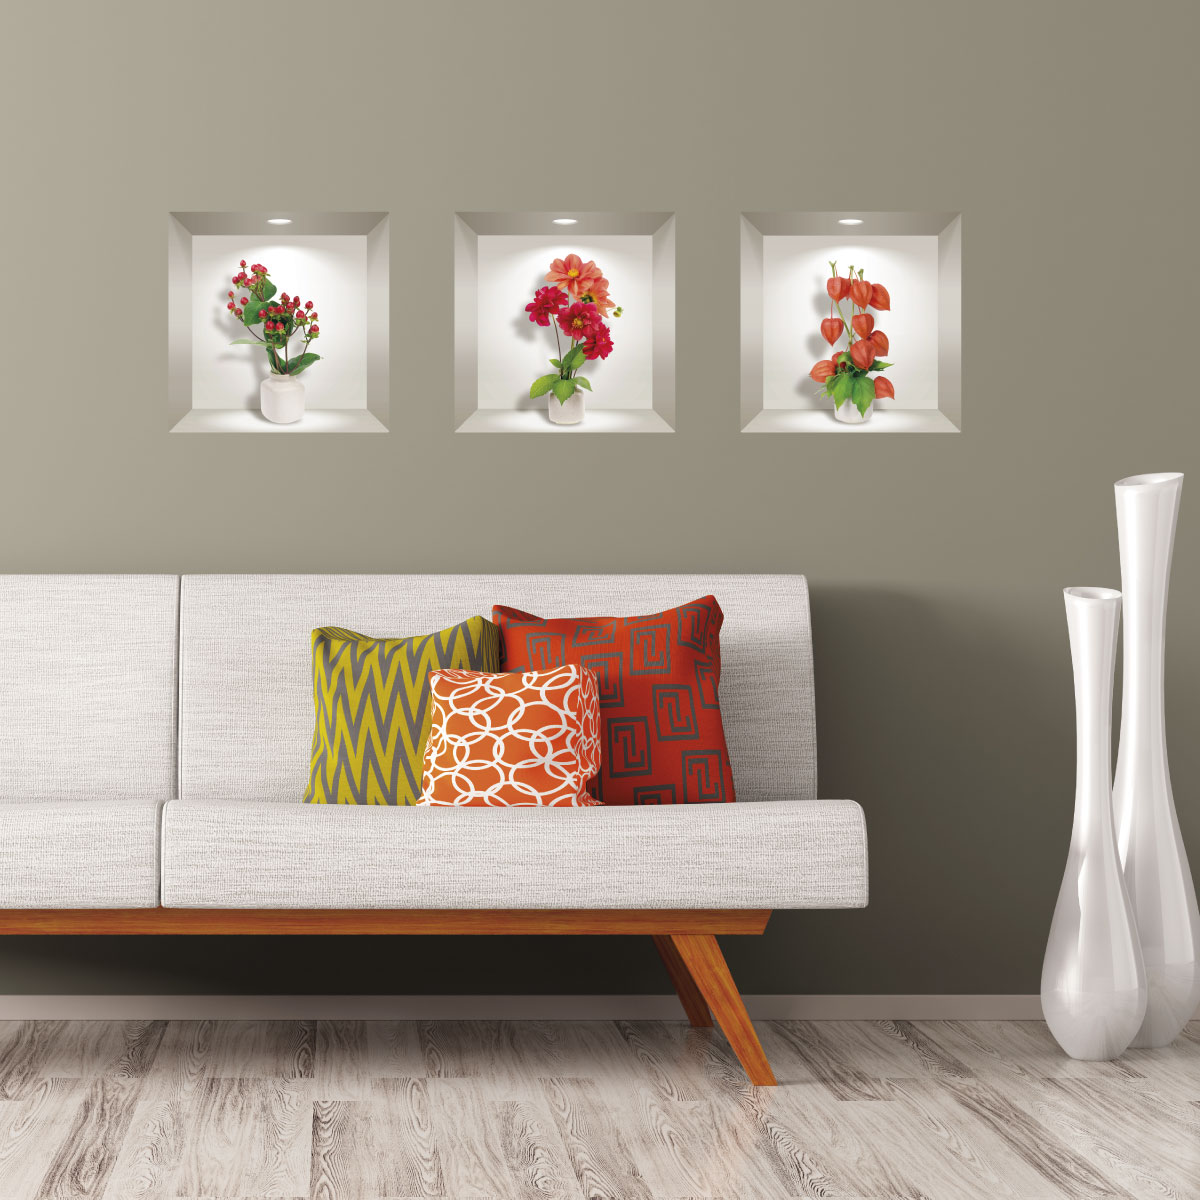 3 wall decal 3D effect Dahlia red, orange and currant flowers